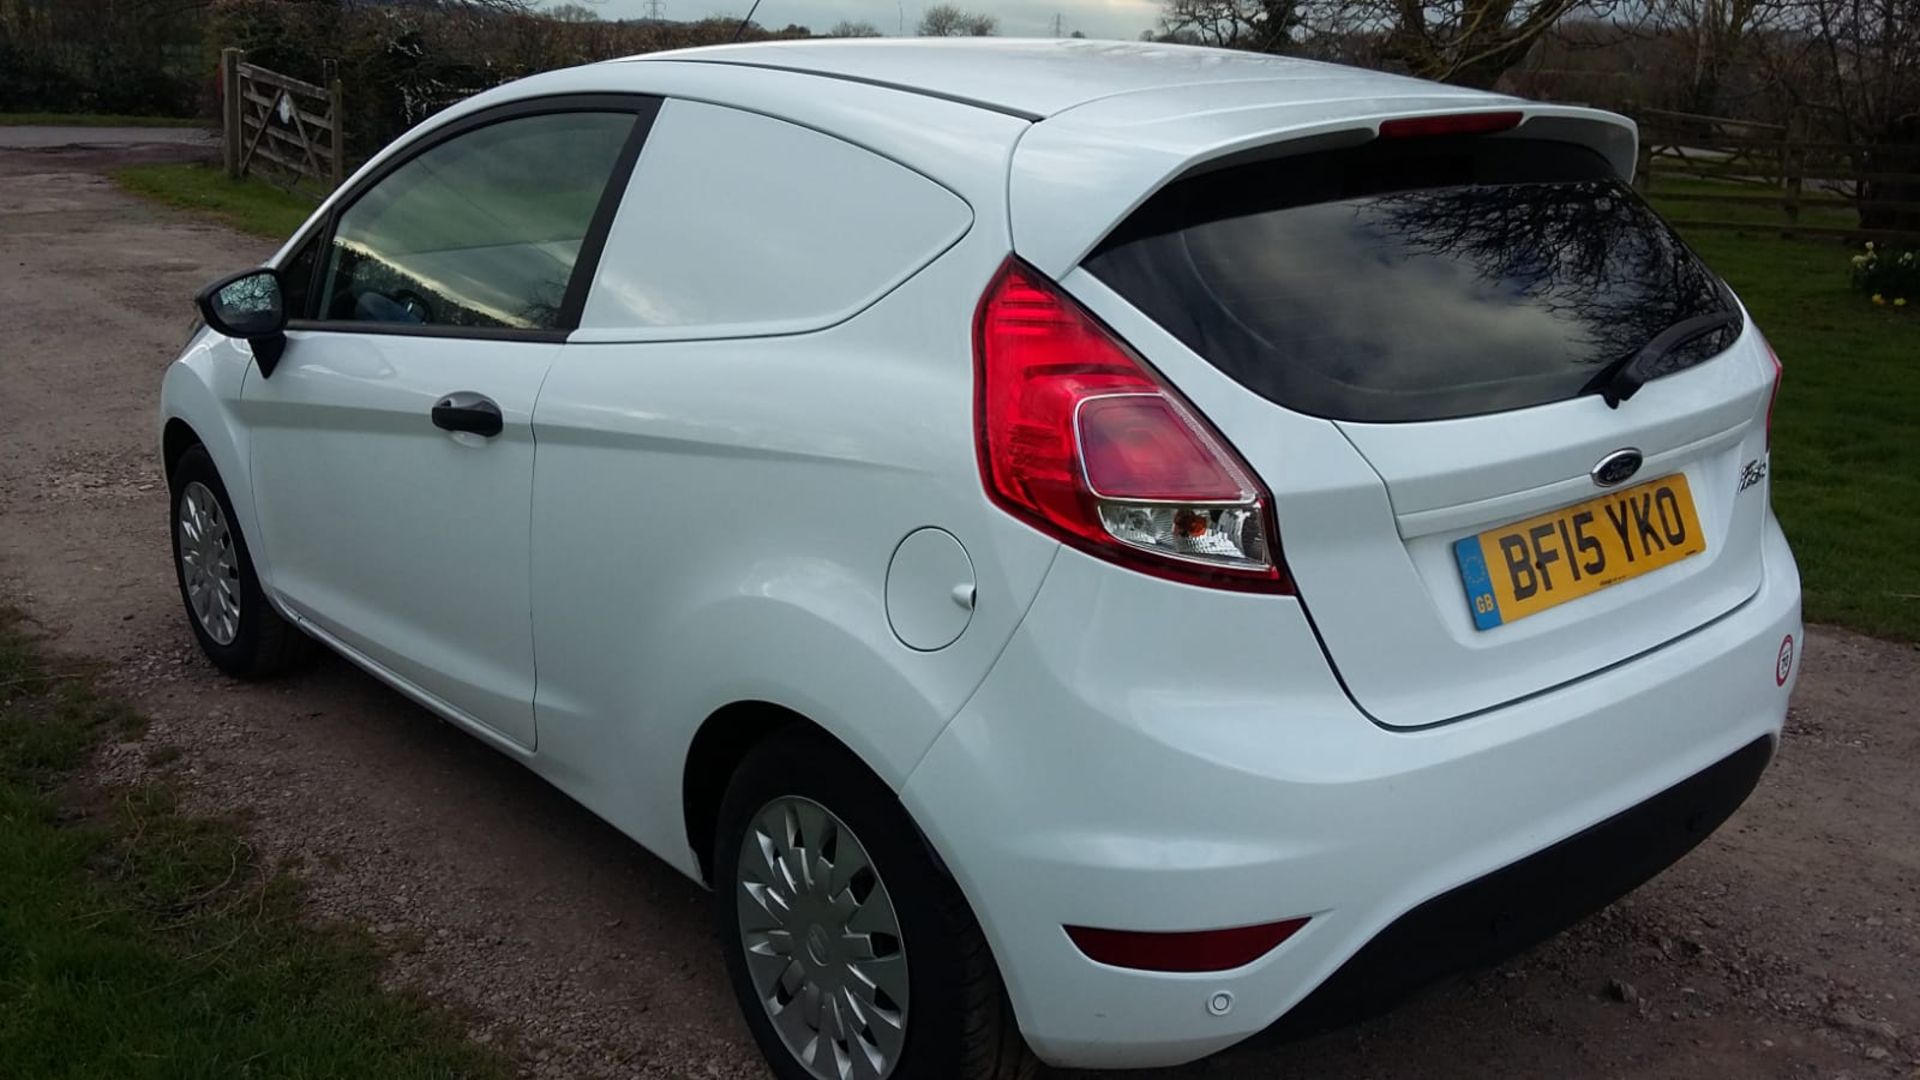 2015/15 REG FORD FIESTA ECONETIC TECH TDCI 1.6 CAR DERIVED VAN, SHOWING 0 FORMER KEEPERS *NO VAT* - Image 3 of 7